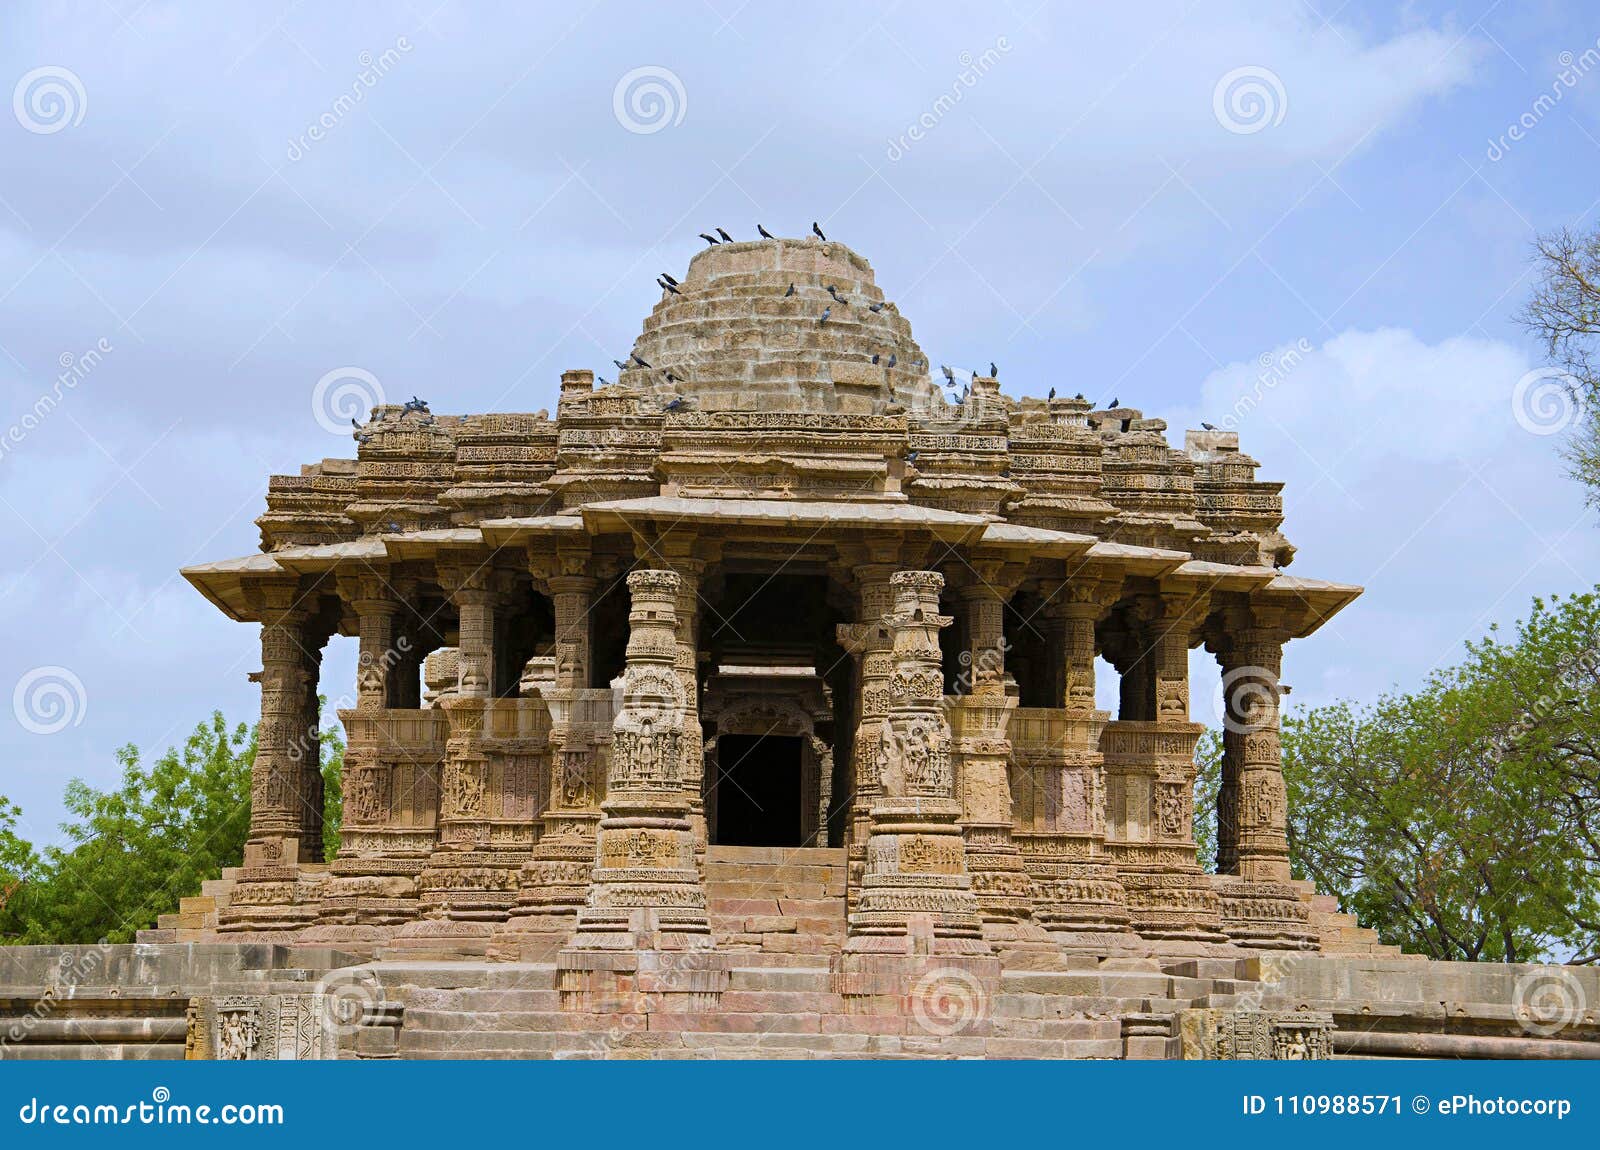 outer view of the sun temple. built in 1026 - 27 ad during the reign of bhima i of the chaulukya dynasty, modhera, mehsana, gujar